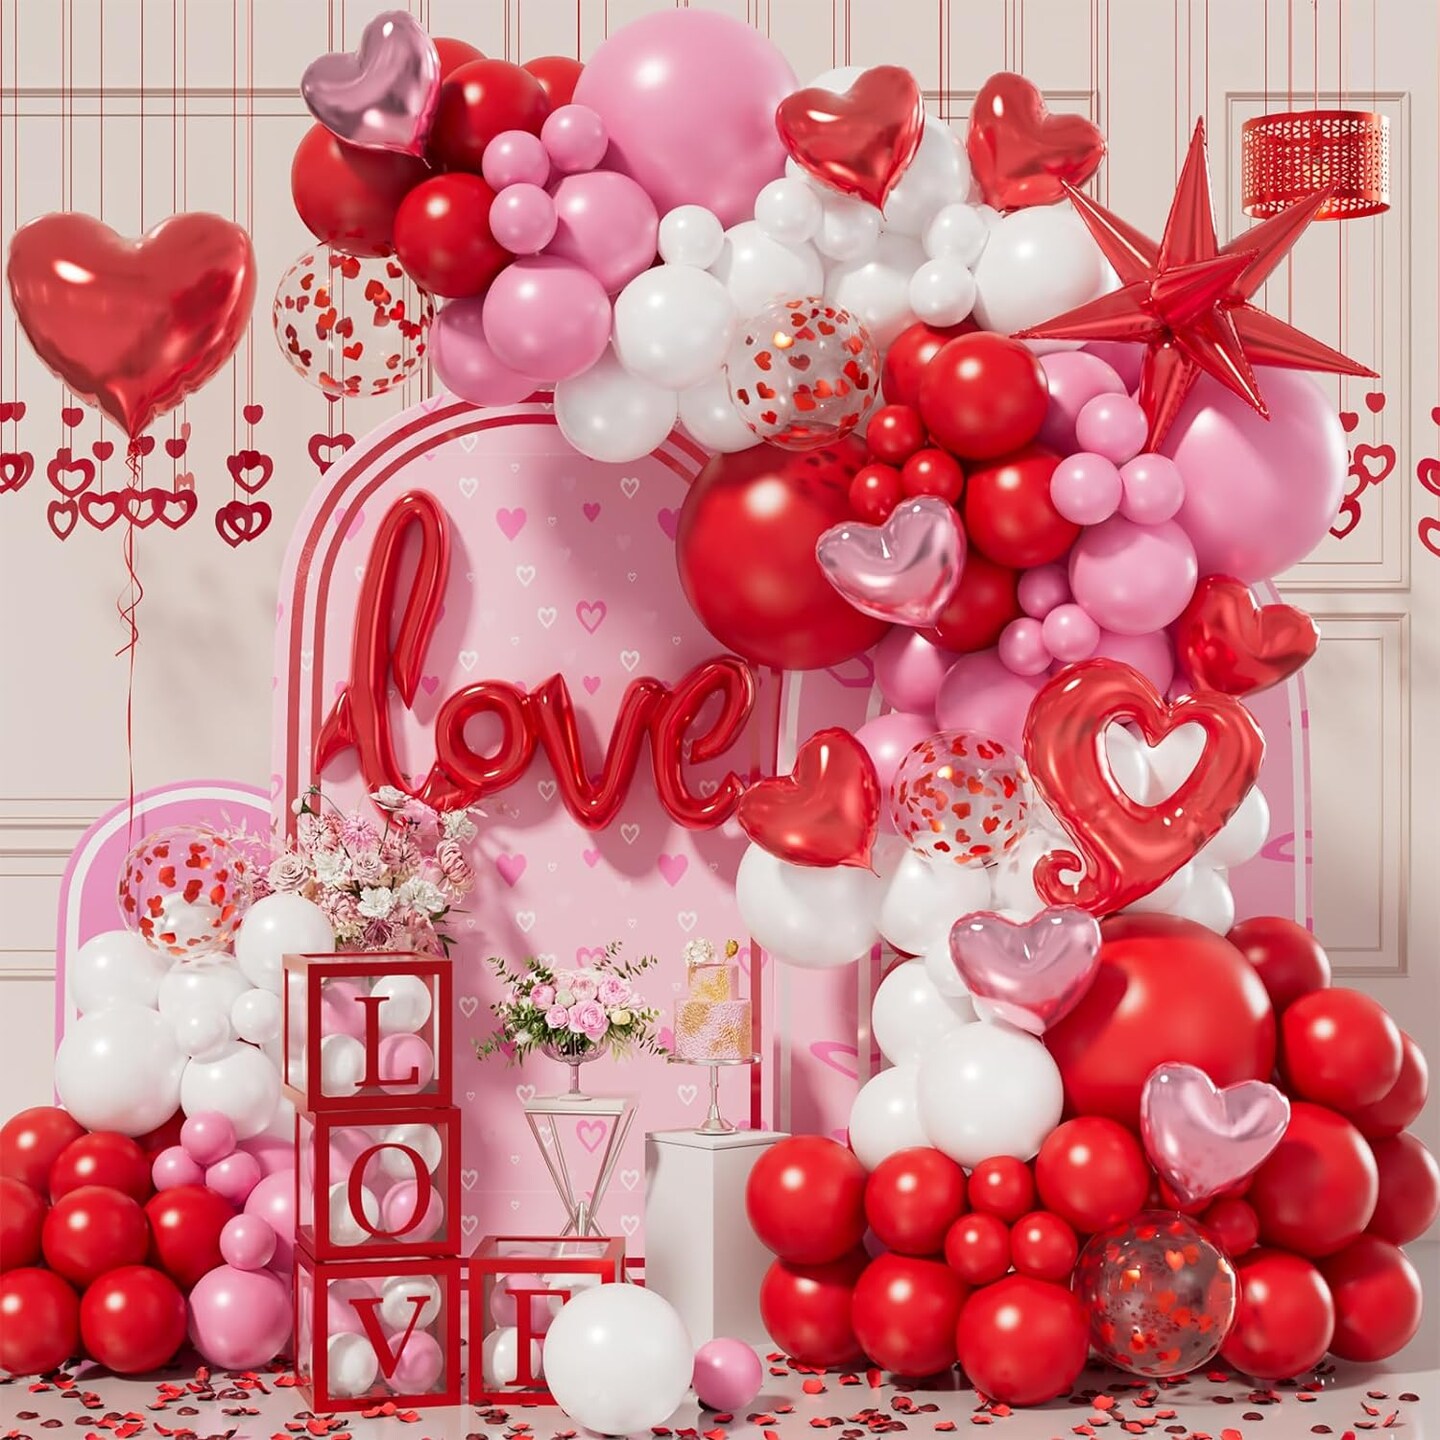 156pcs Valentines Day Balloon Arch Garland Kit with Pink White Red Confetti Heart Balloons Love Foil Balloons Explosion Star Balloons Rose Petals for Anniversary Wedding Romantic